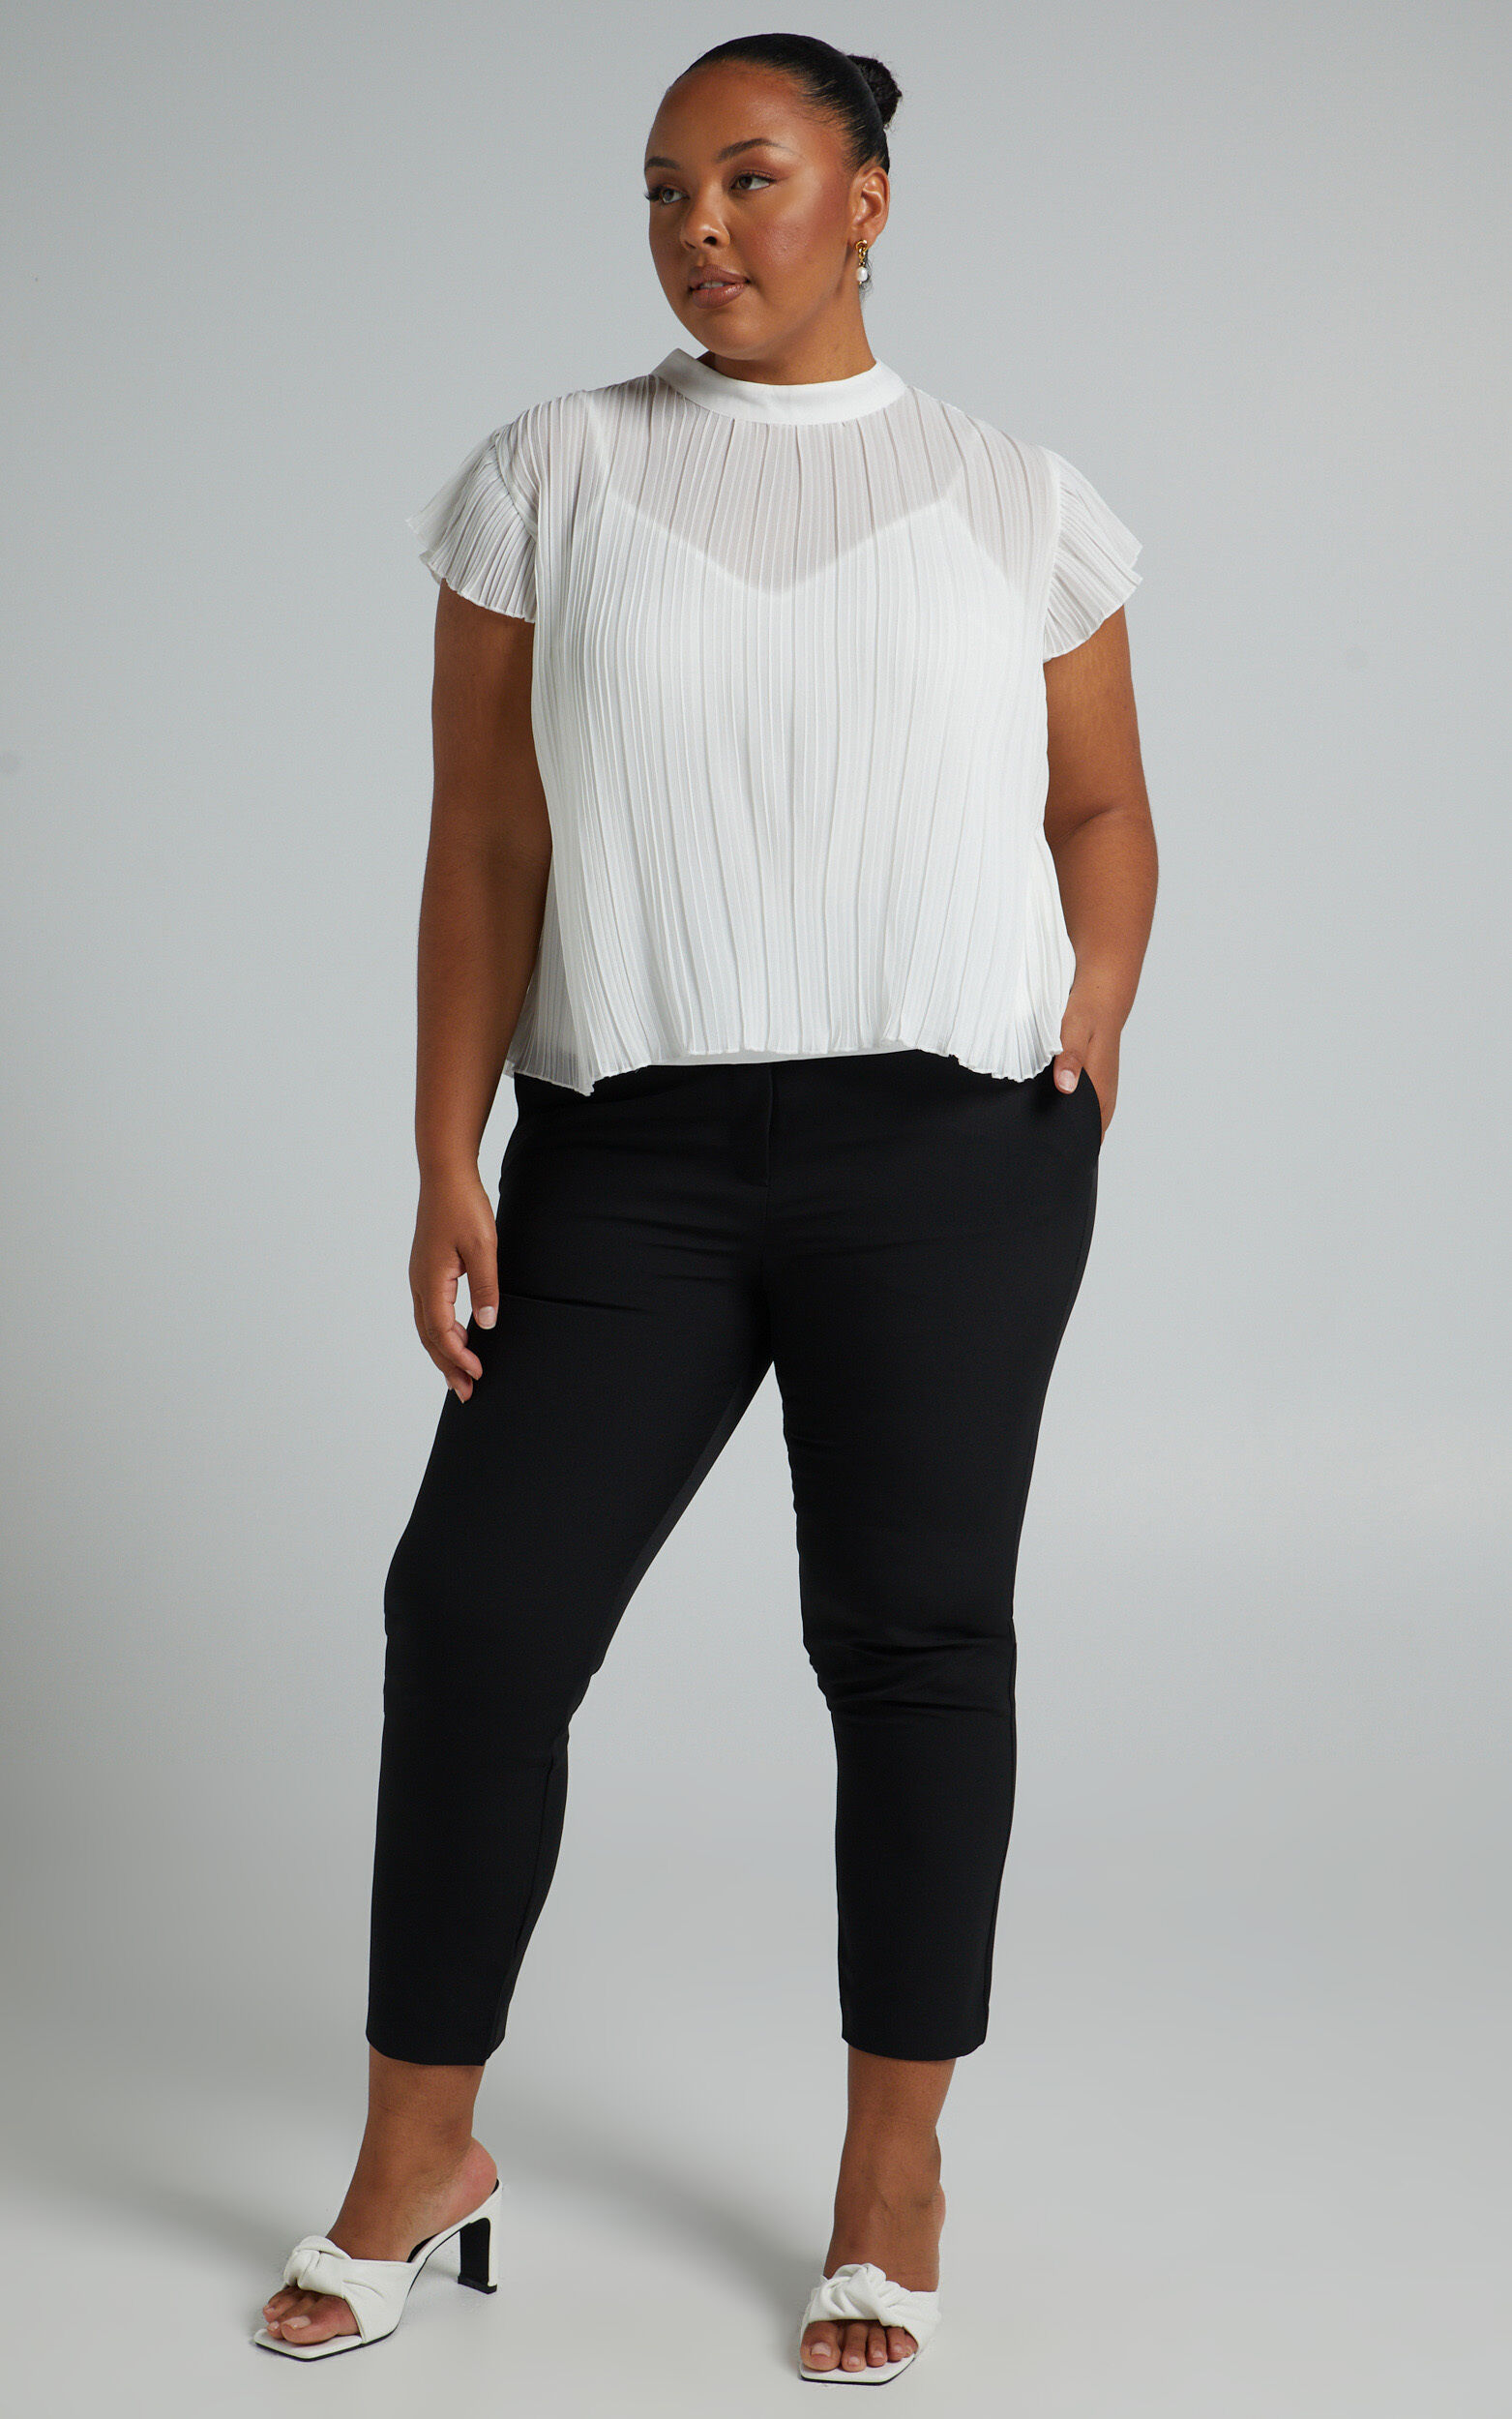 Harlow High Neck Pleated Workwear Top in White - 04, WHT3, super-hi-res image number null